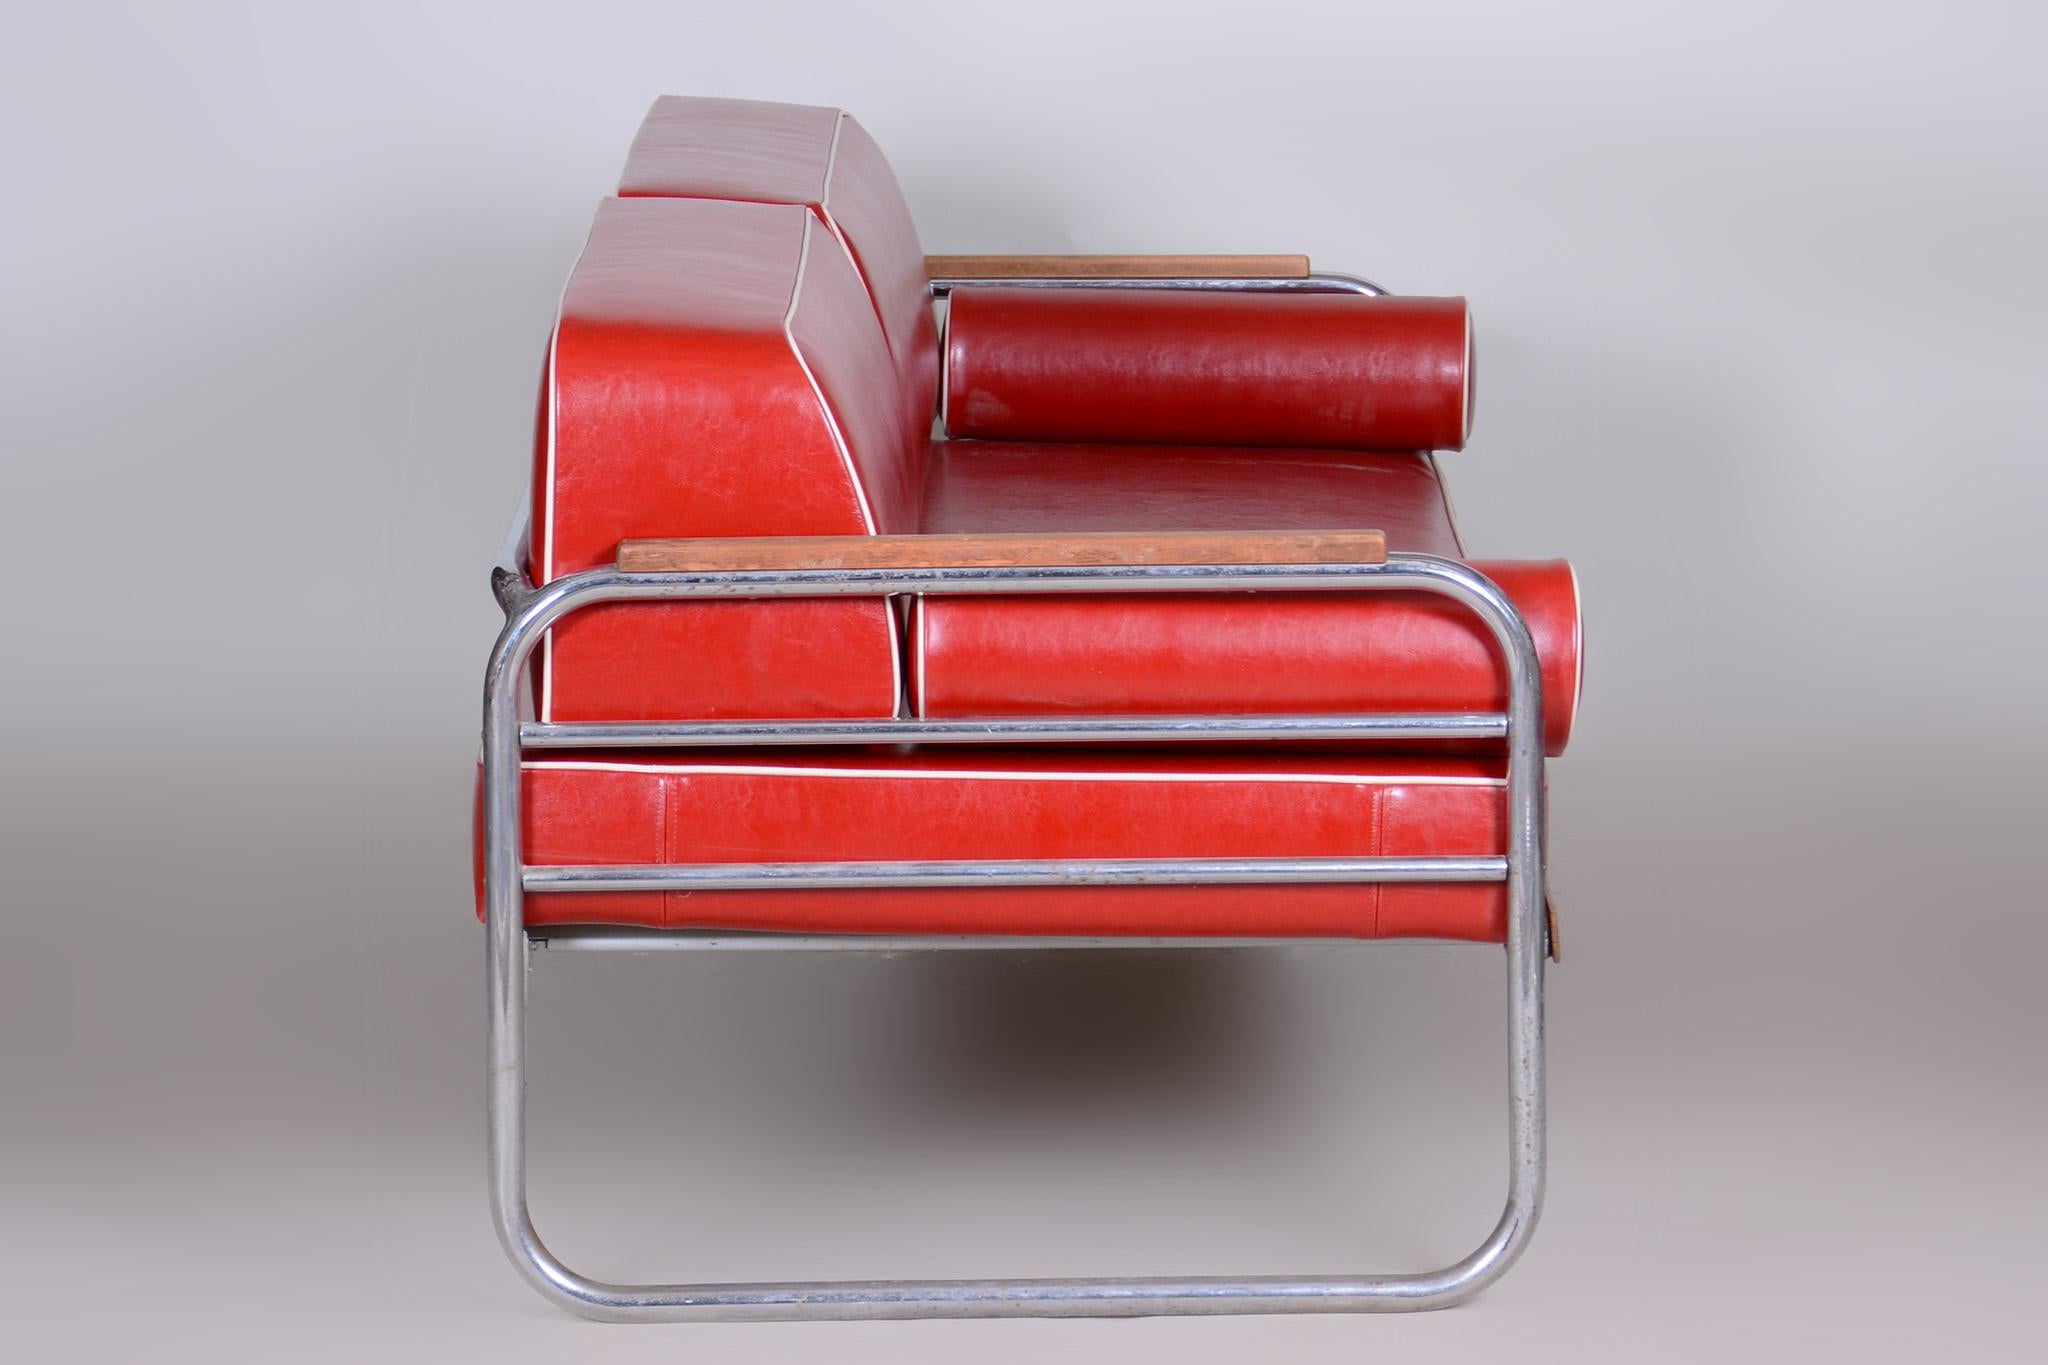 Red High-Quality Leather Bauhaus Sofa by Thonet, Chrome, Fully Restored, 1930s For Sale 2